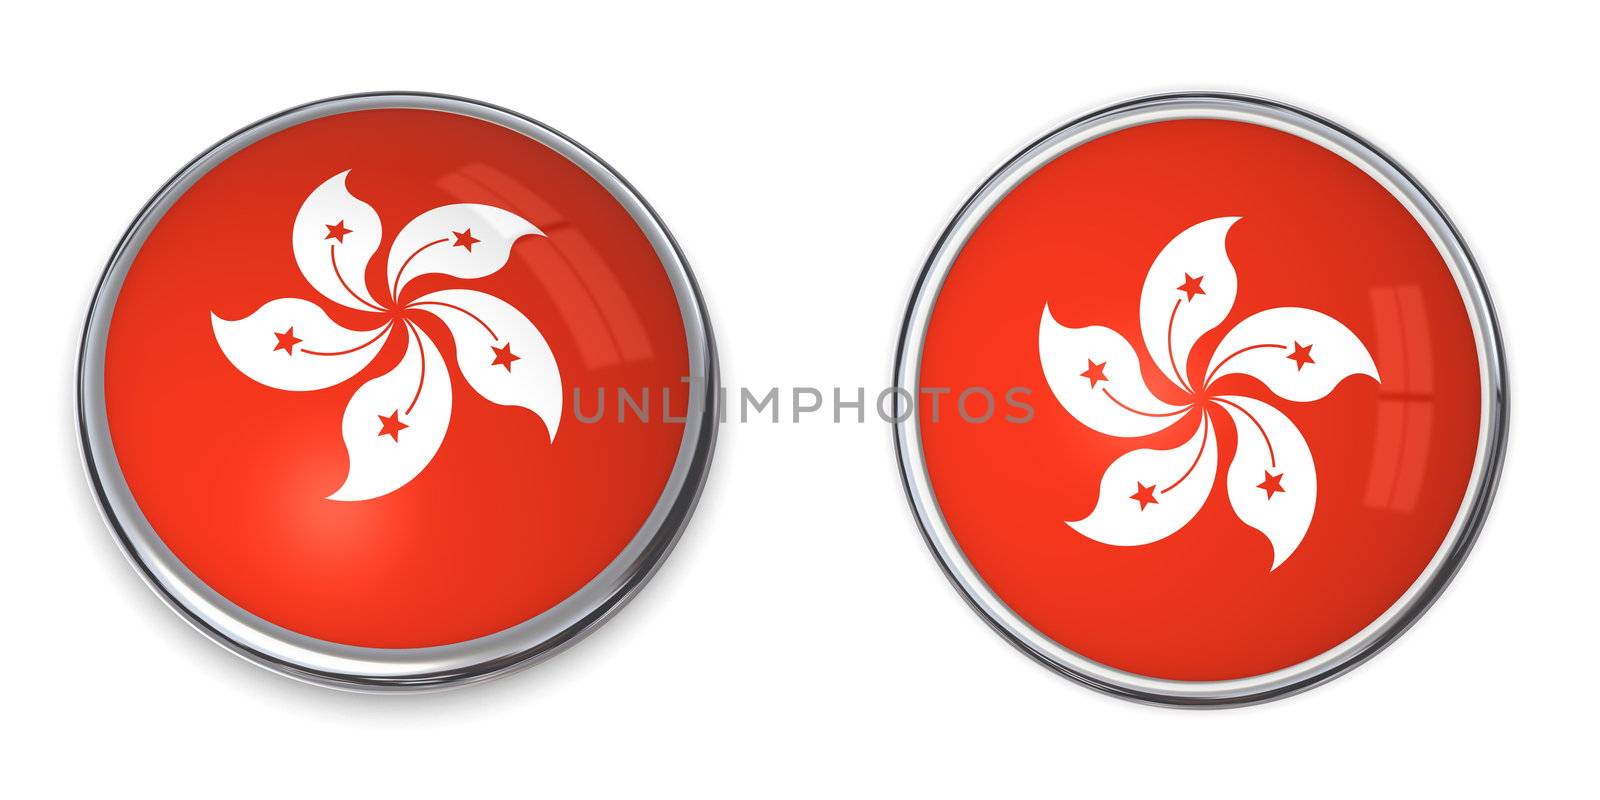 button style banner in 3D of Hong Kong